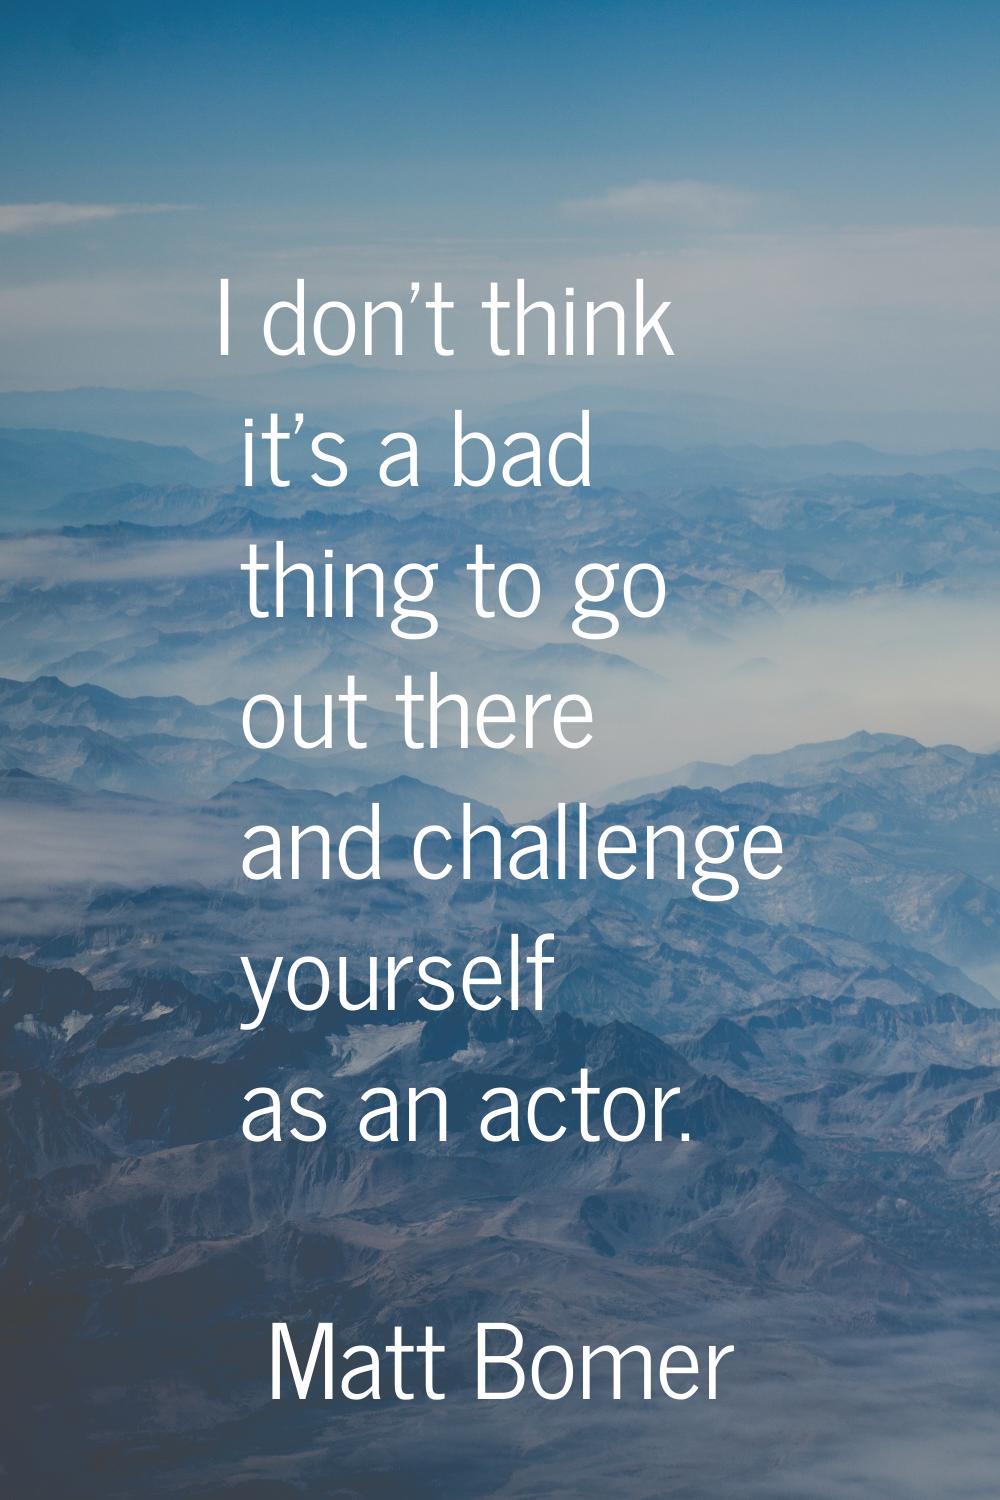 I don't think it's a bad thing to go out there and challenge yourself as an actor.